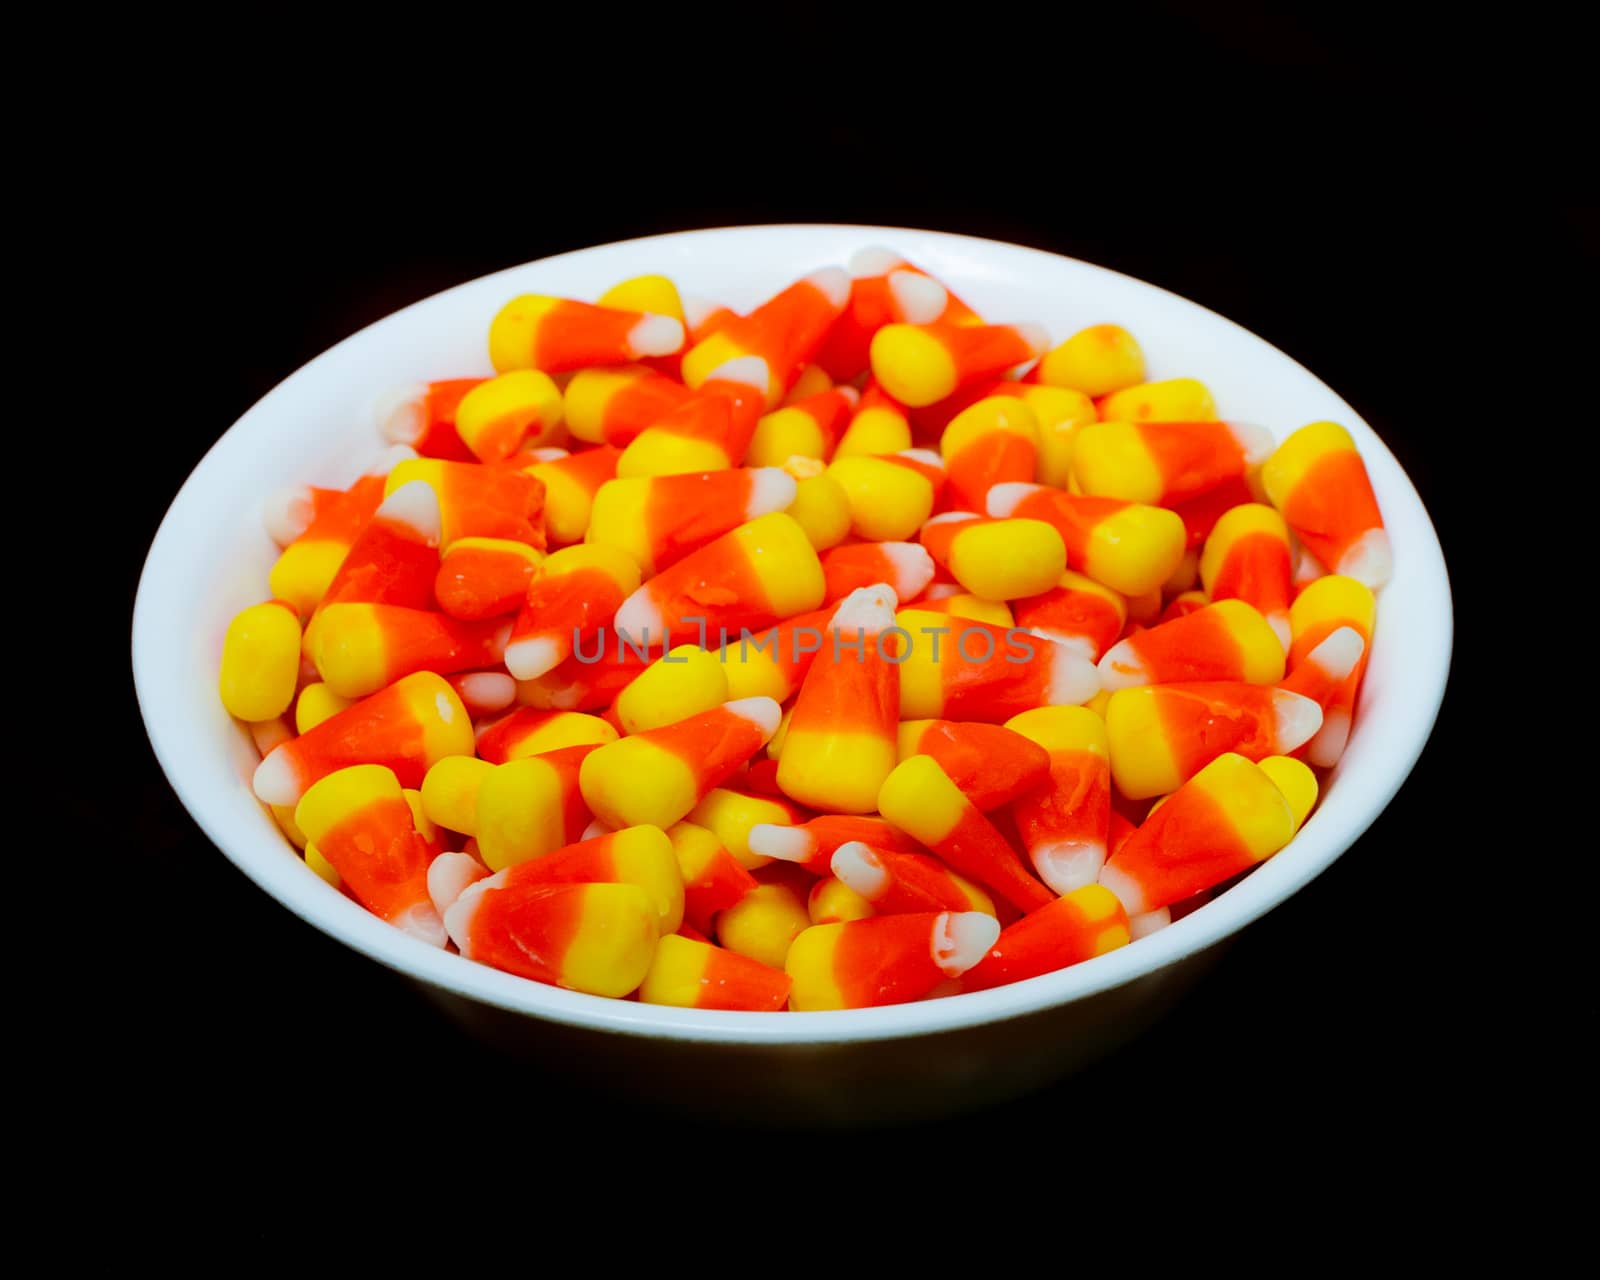 Candy Corn in a bowl isolated against a black background